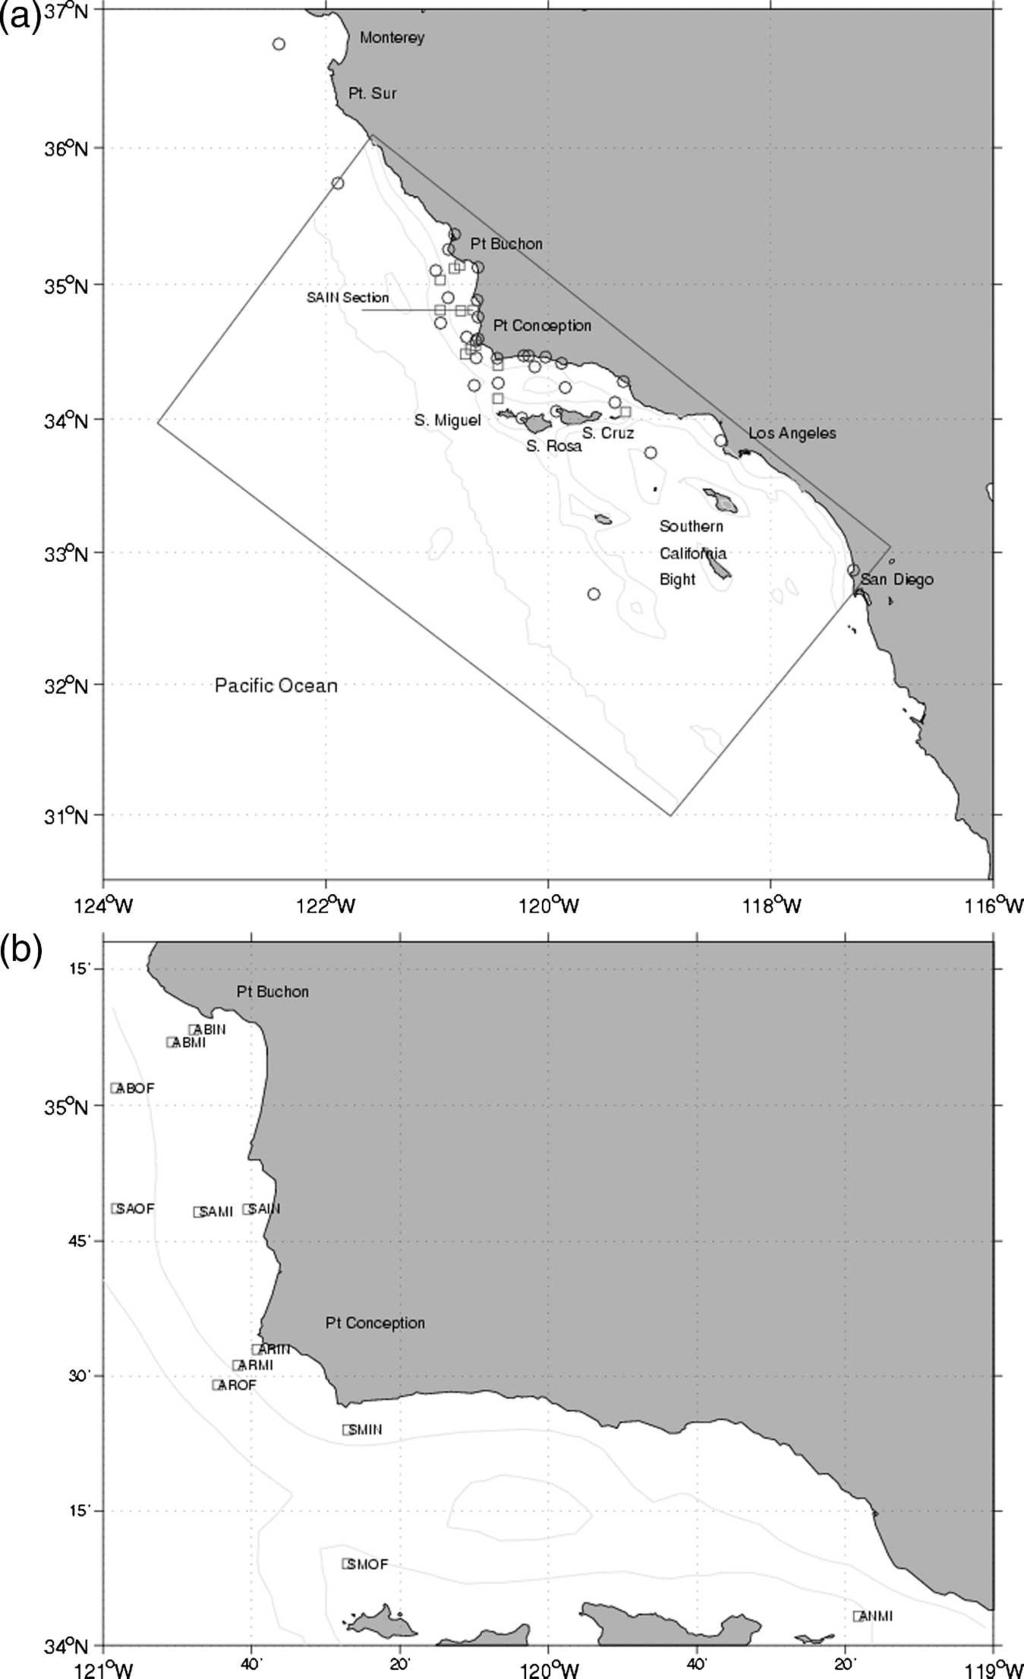 1230 JOURNAL OF PHYSICAL OCEANOGRAPHY VOLUME 35 FIG. 1. (a) A locator map of the ocean region of interest. The rectangle is the ocean model domain.